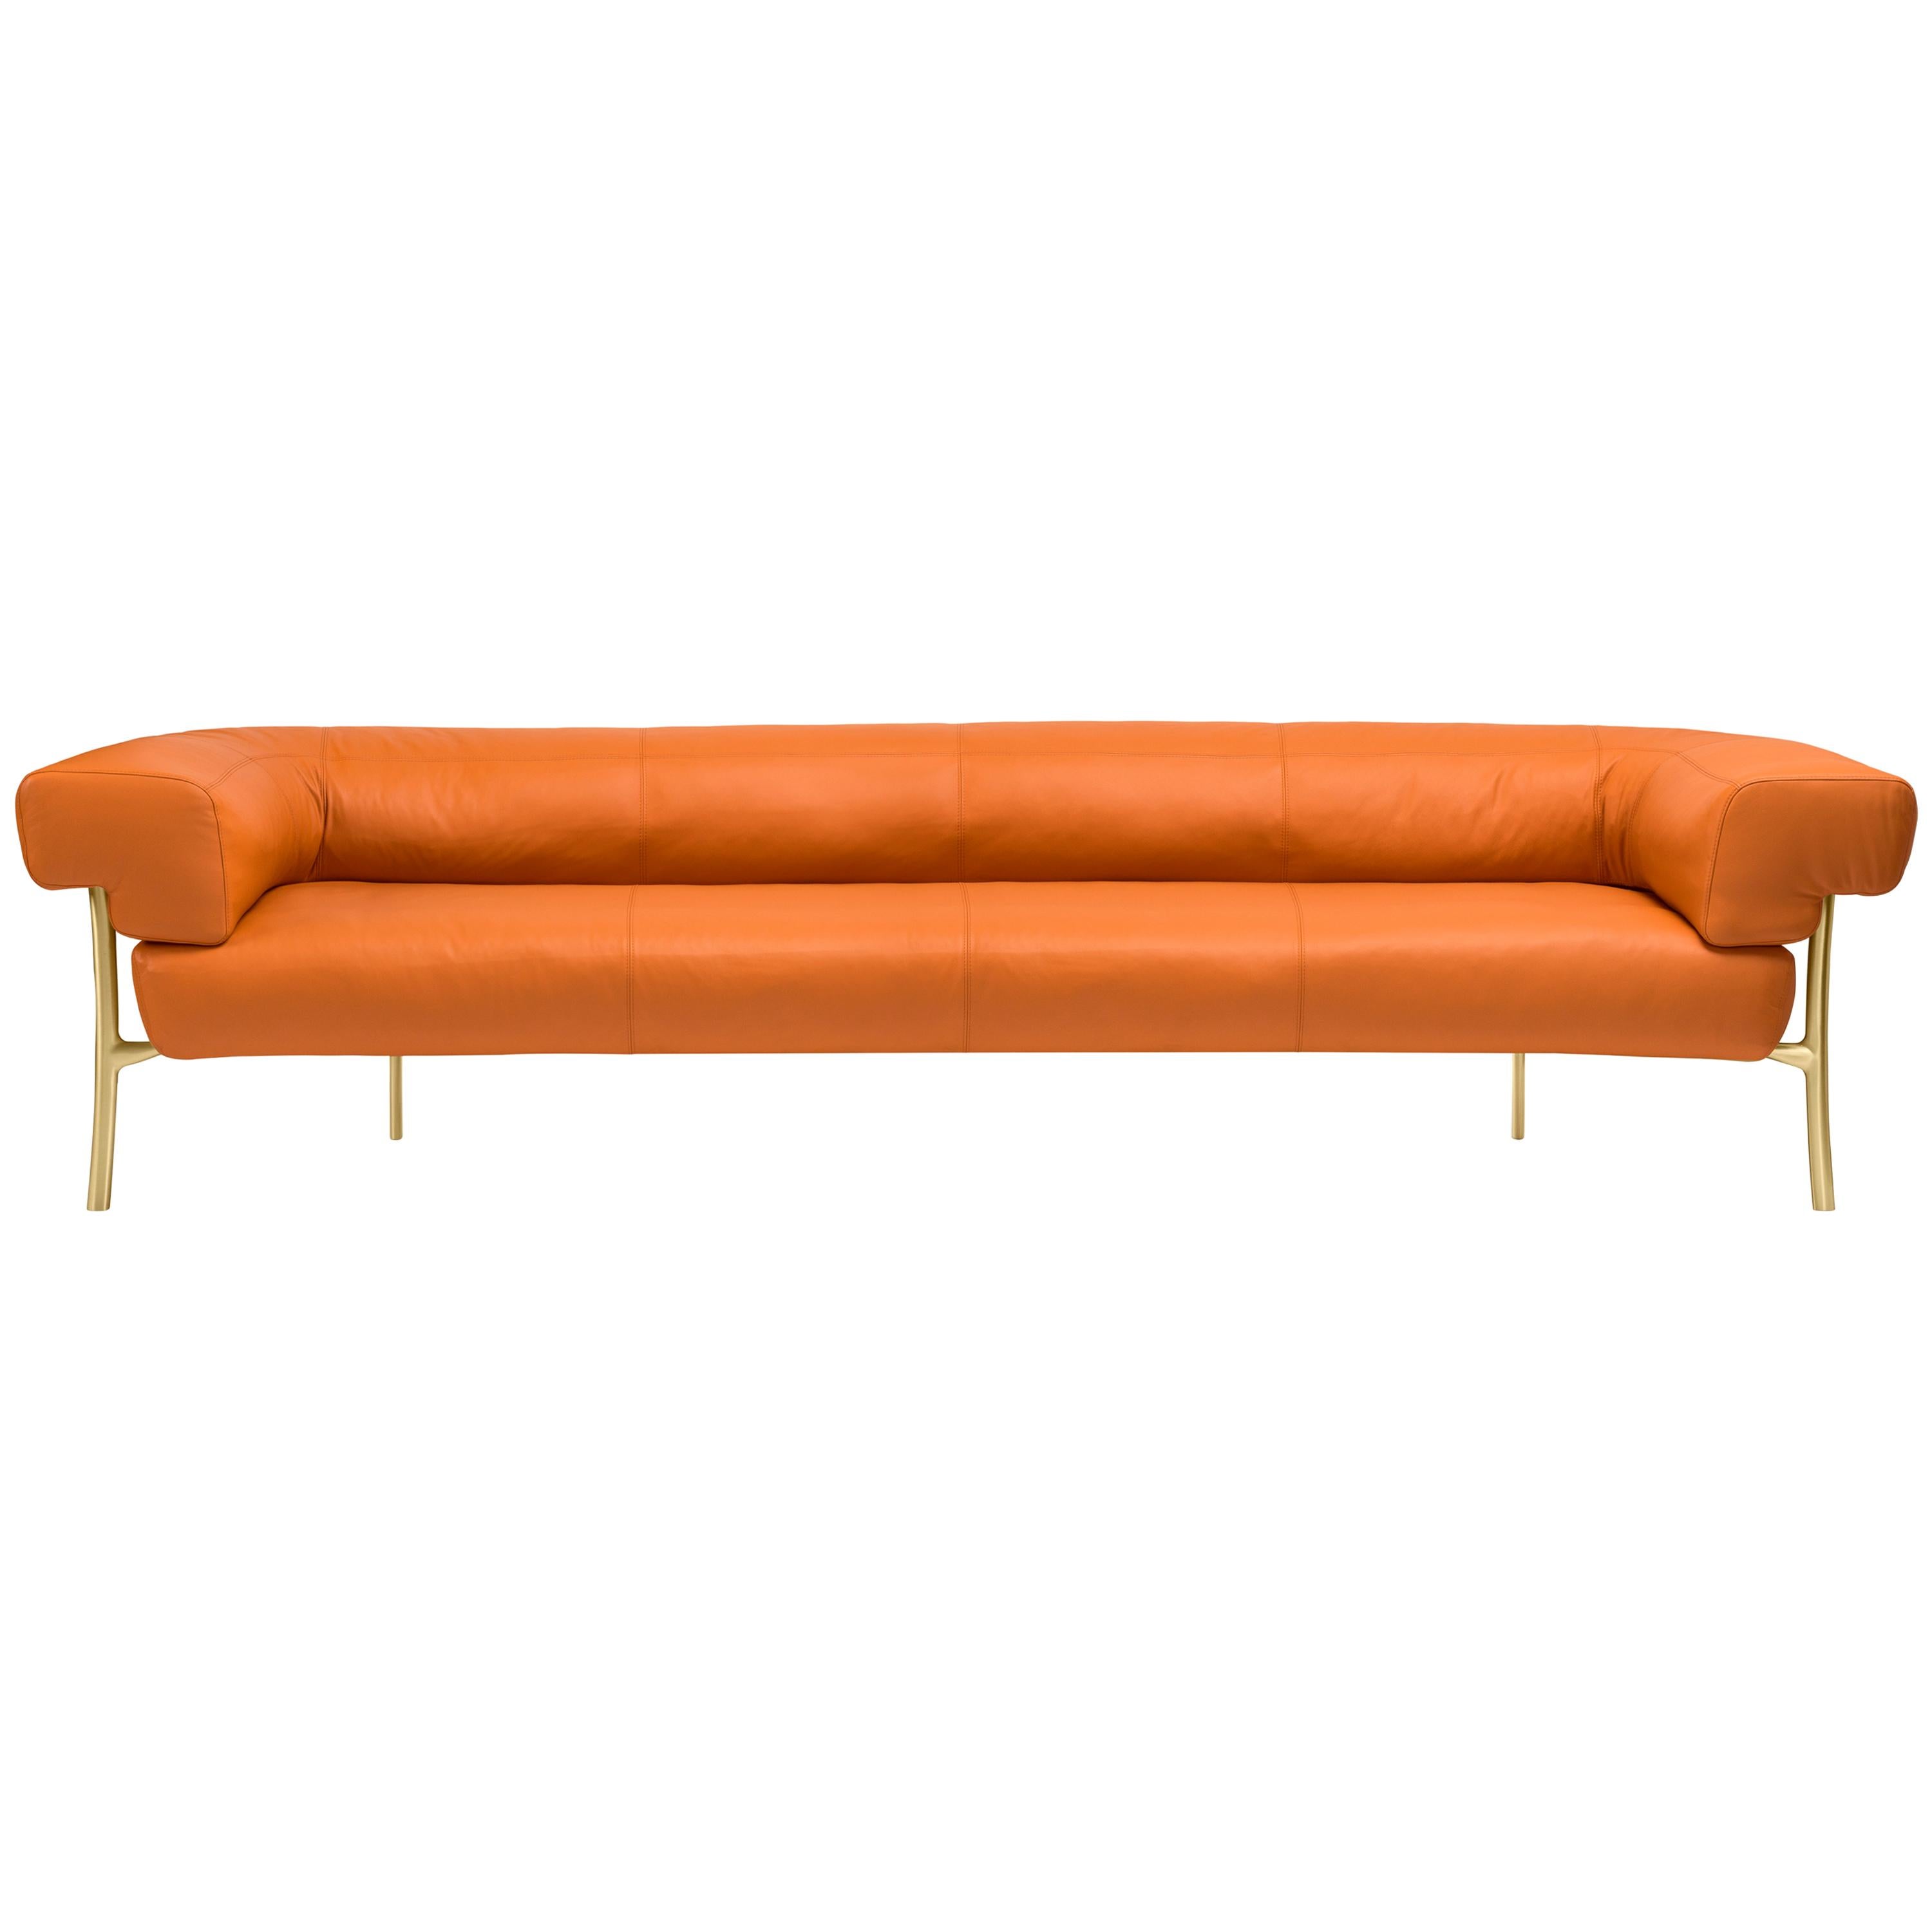 Katana 4 Seater Sofa in Arancio Natural Leather with Satin Brass Legs For Sale